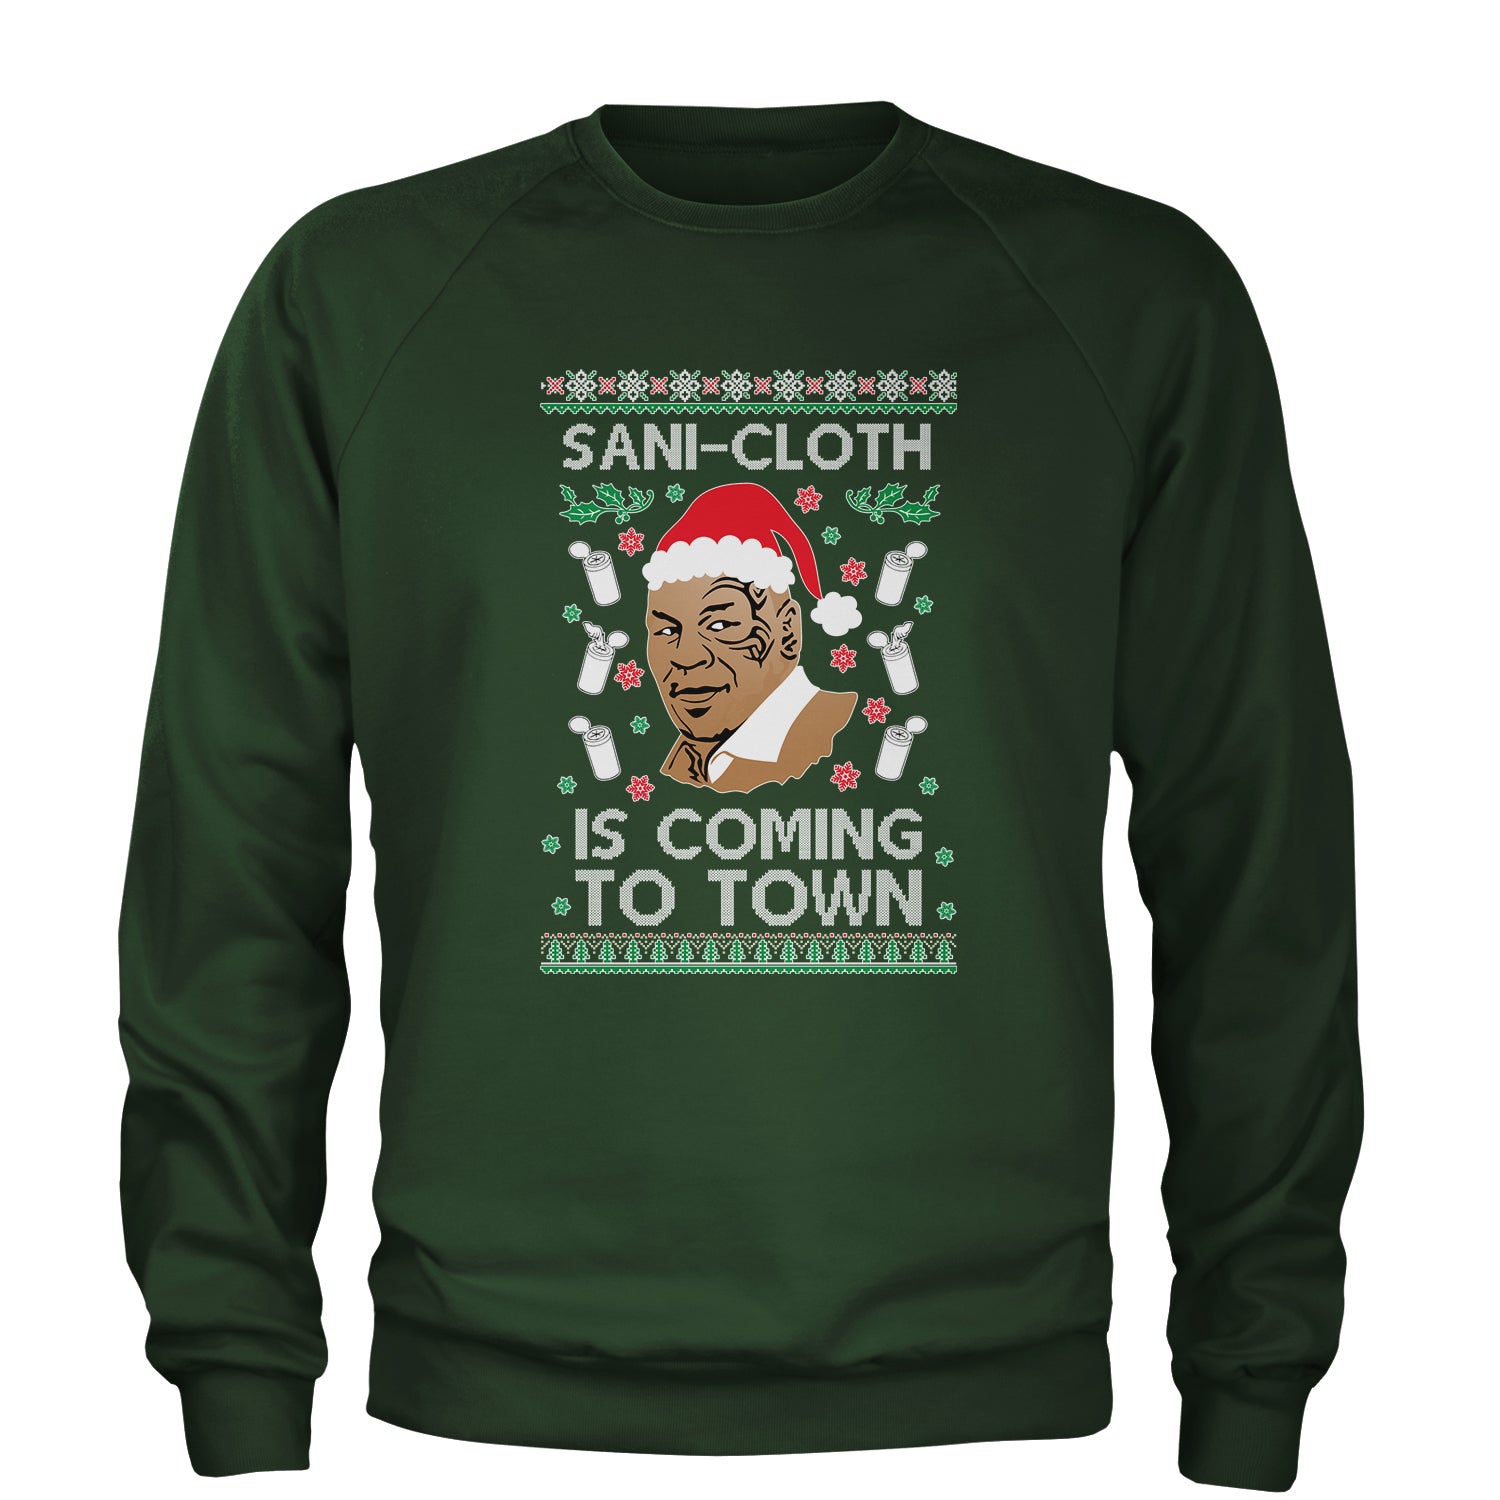 Sani-Cloth Is Coming To Town Ugly Christmas Adult Crewneck Sweatshirt 2021, mike, miketyson, tyson by Expression Tees